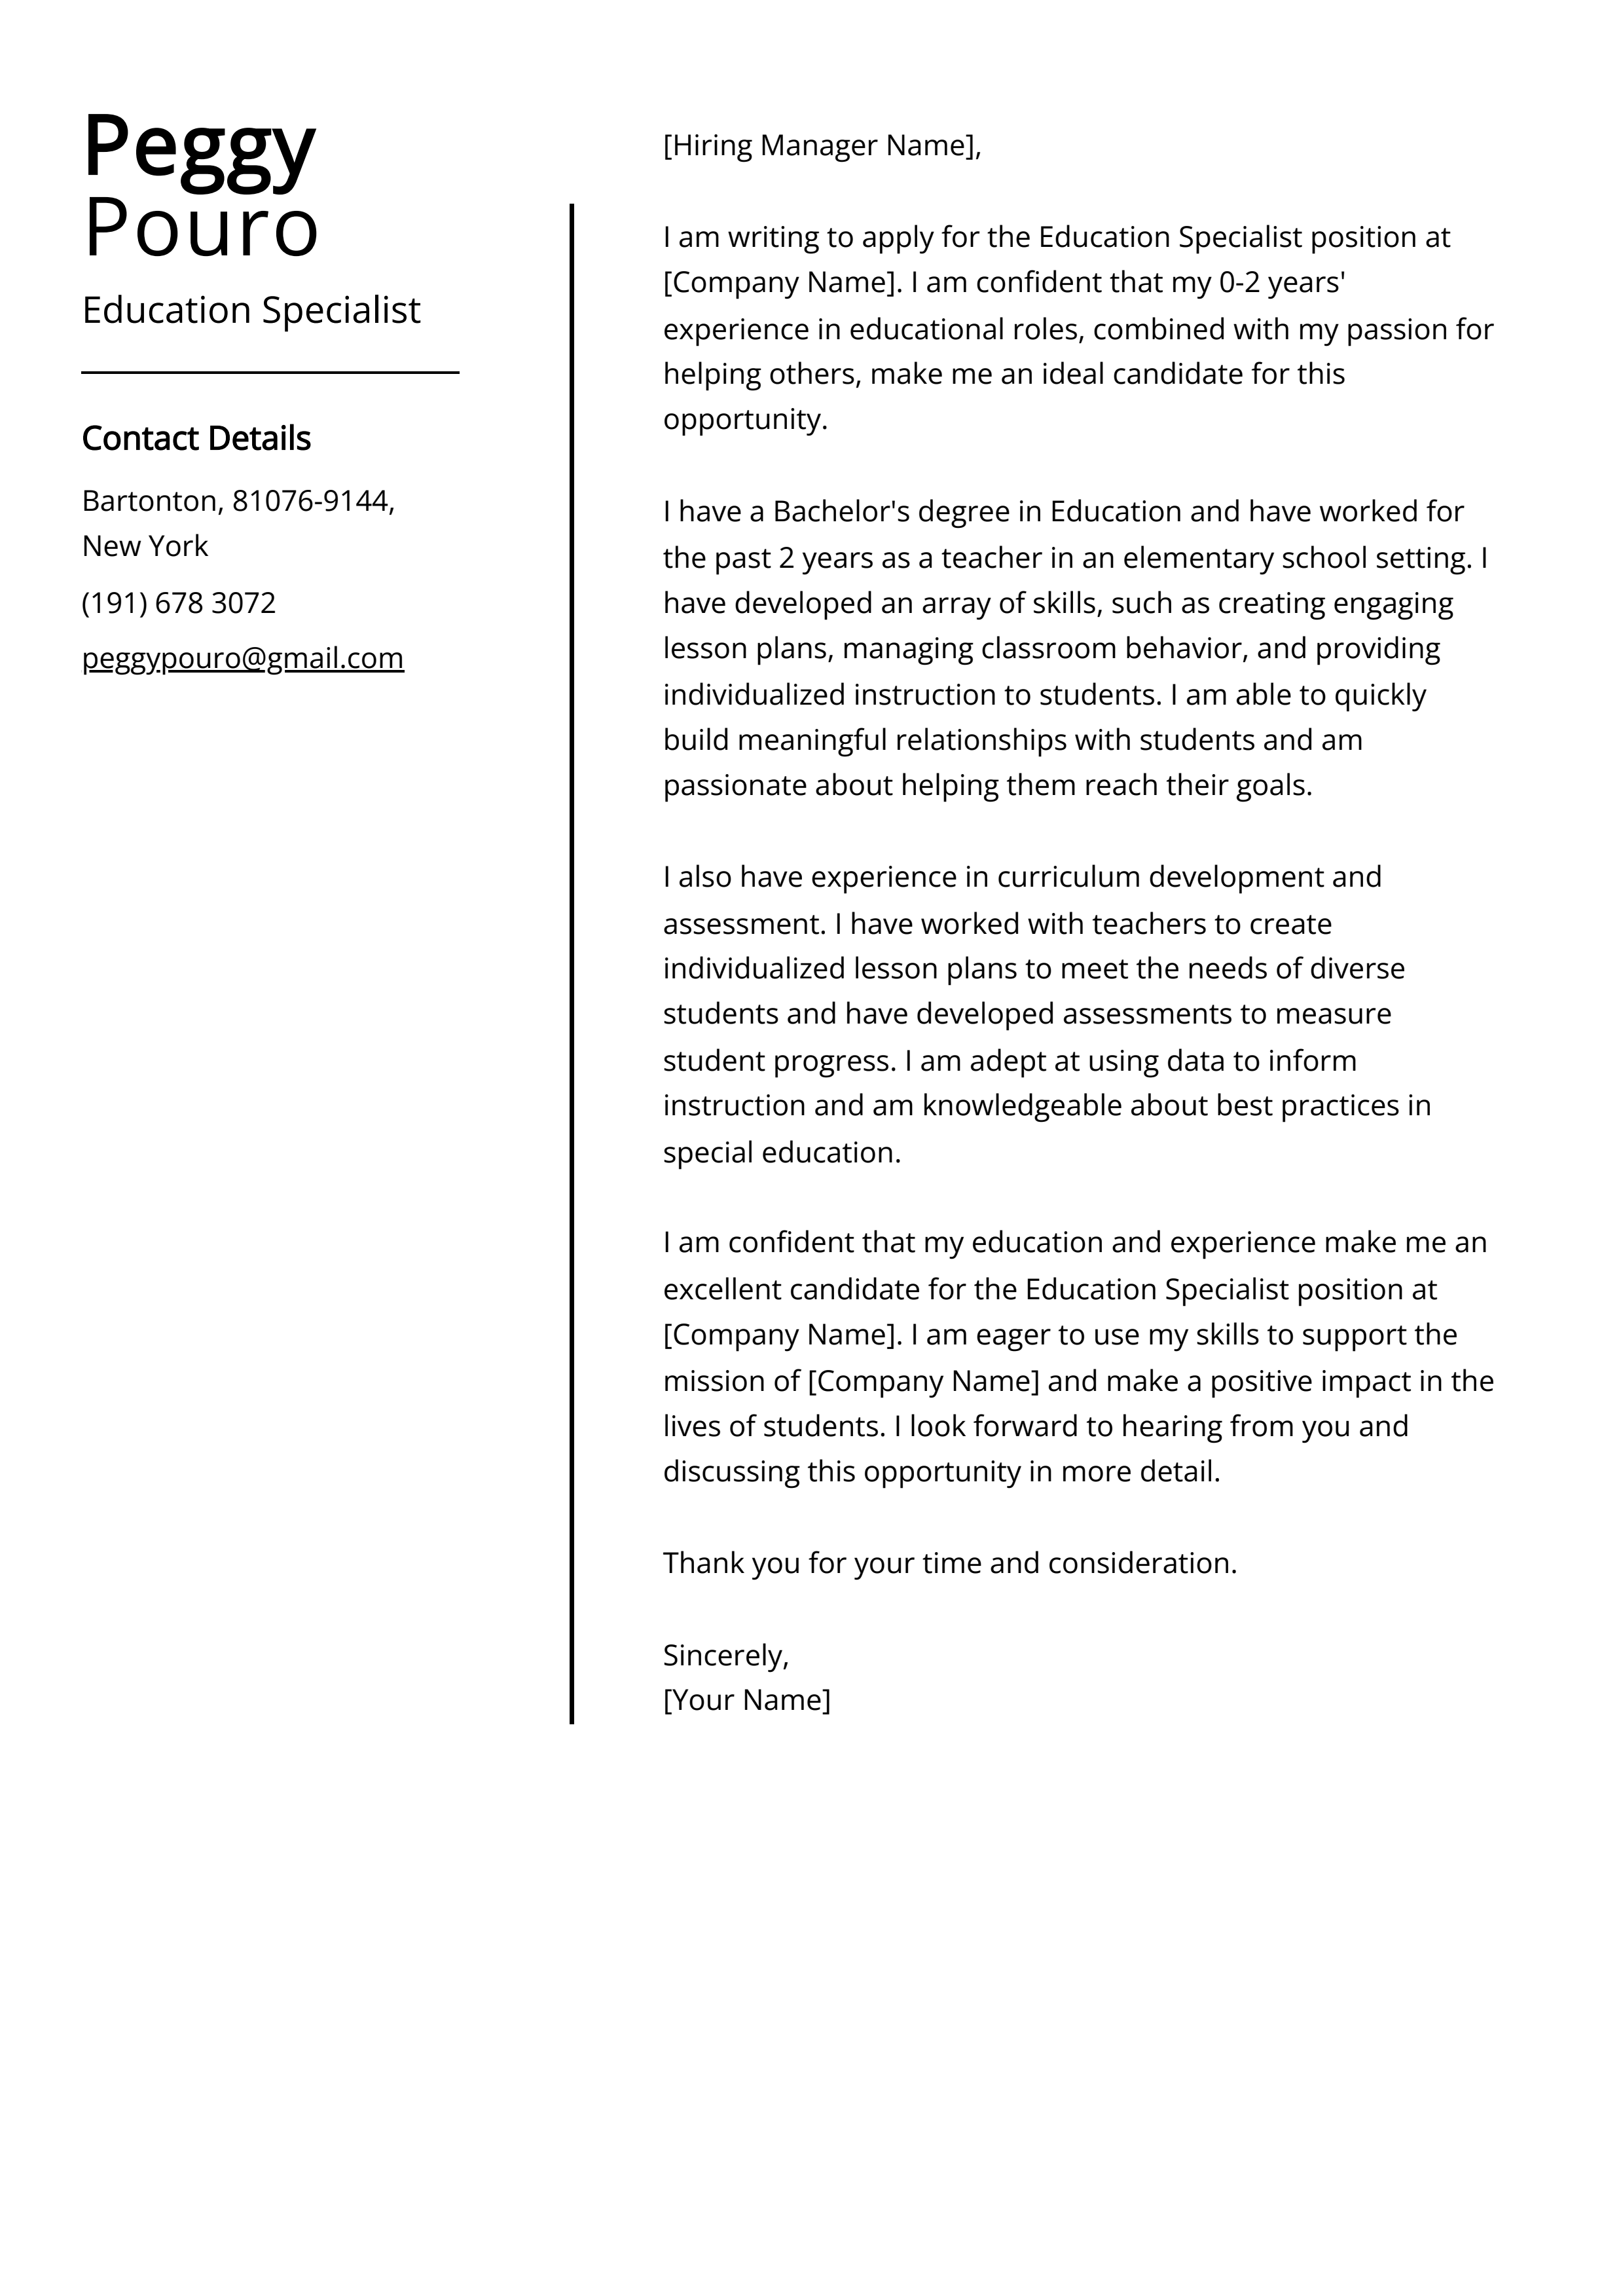 Education Specialist Cover Letter Example